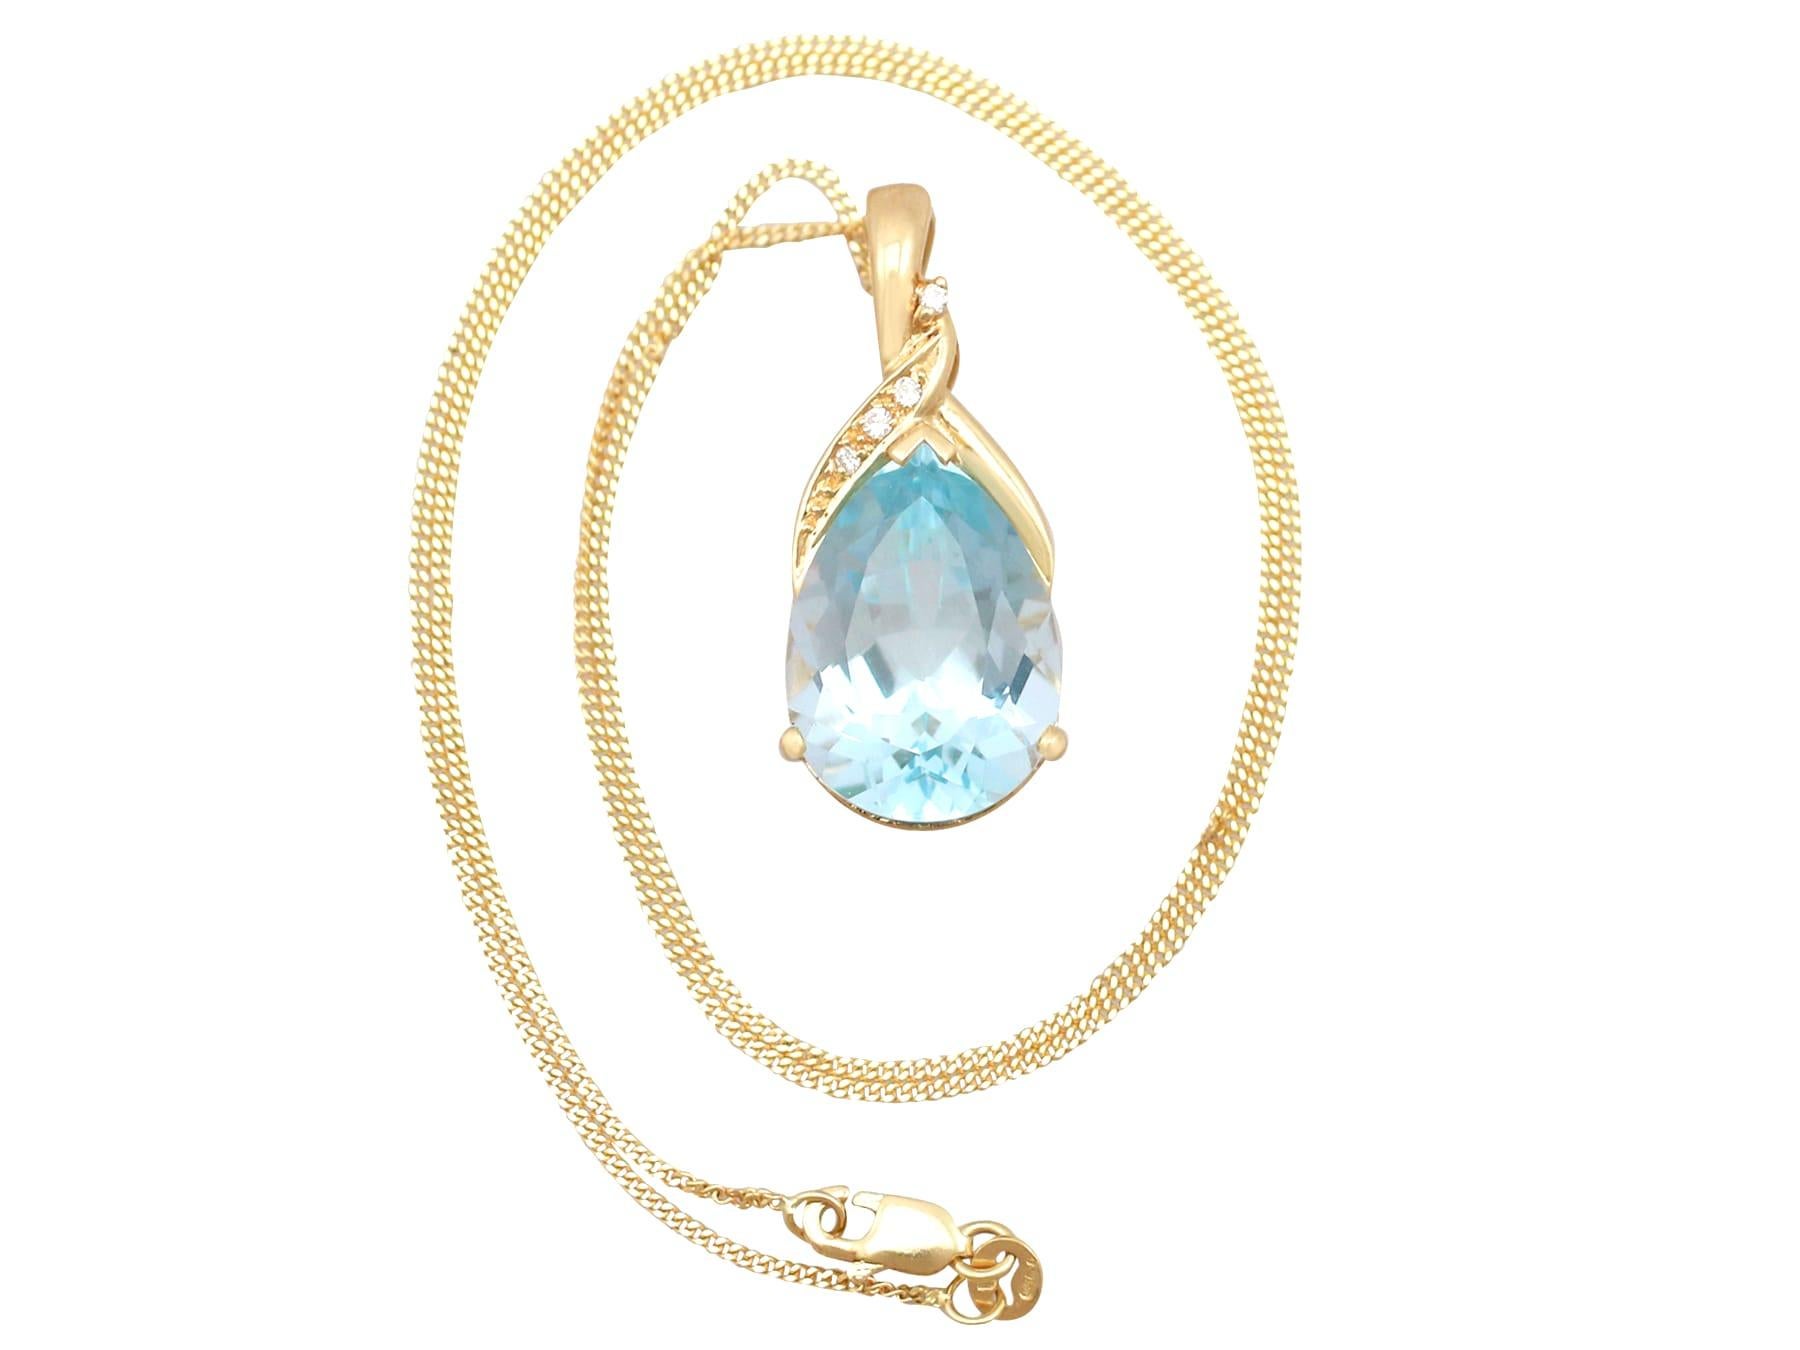 An impressive vintage 11.98Ct blue topaz and 0.03Ct diamond, 18k yellow gold pendant; part of our diverse antique jewelry and estate jewelry collections.

This fine and impressive blue topaz pendant has been crafted in 18k yellow gold.

The pierced